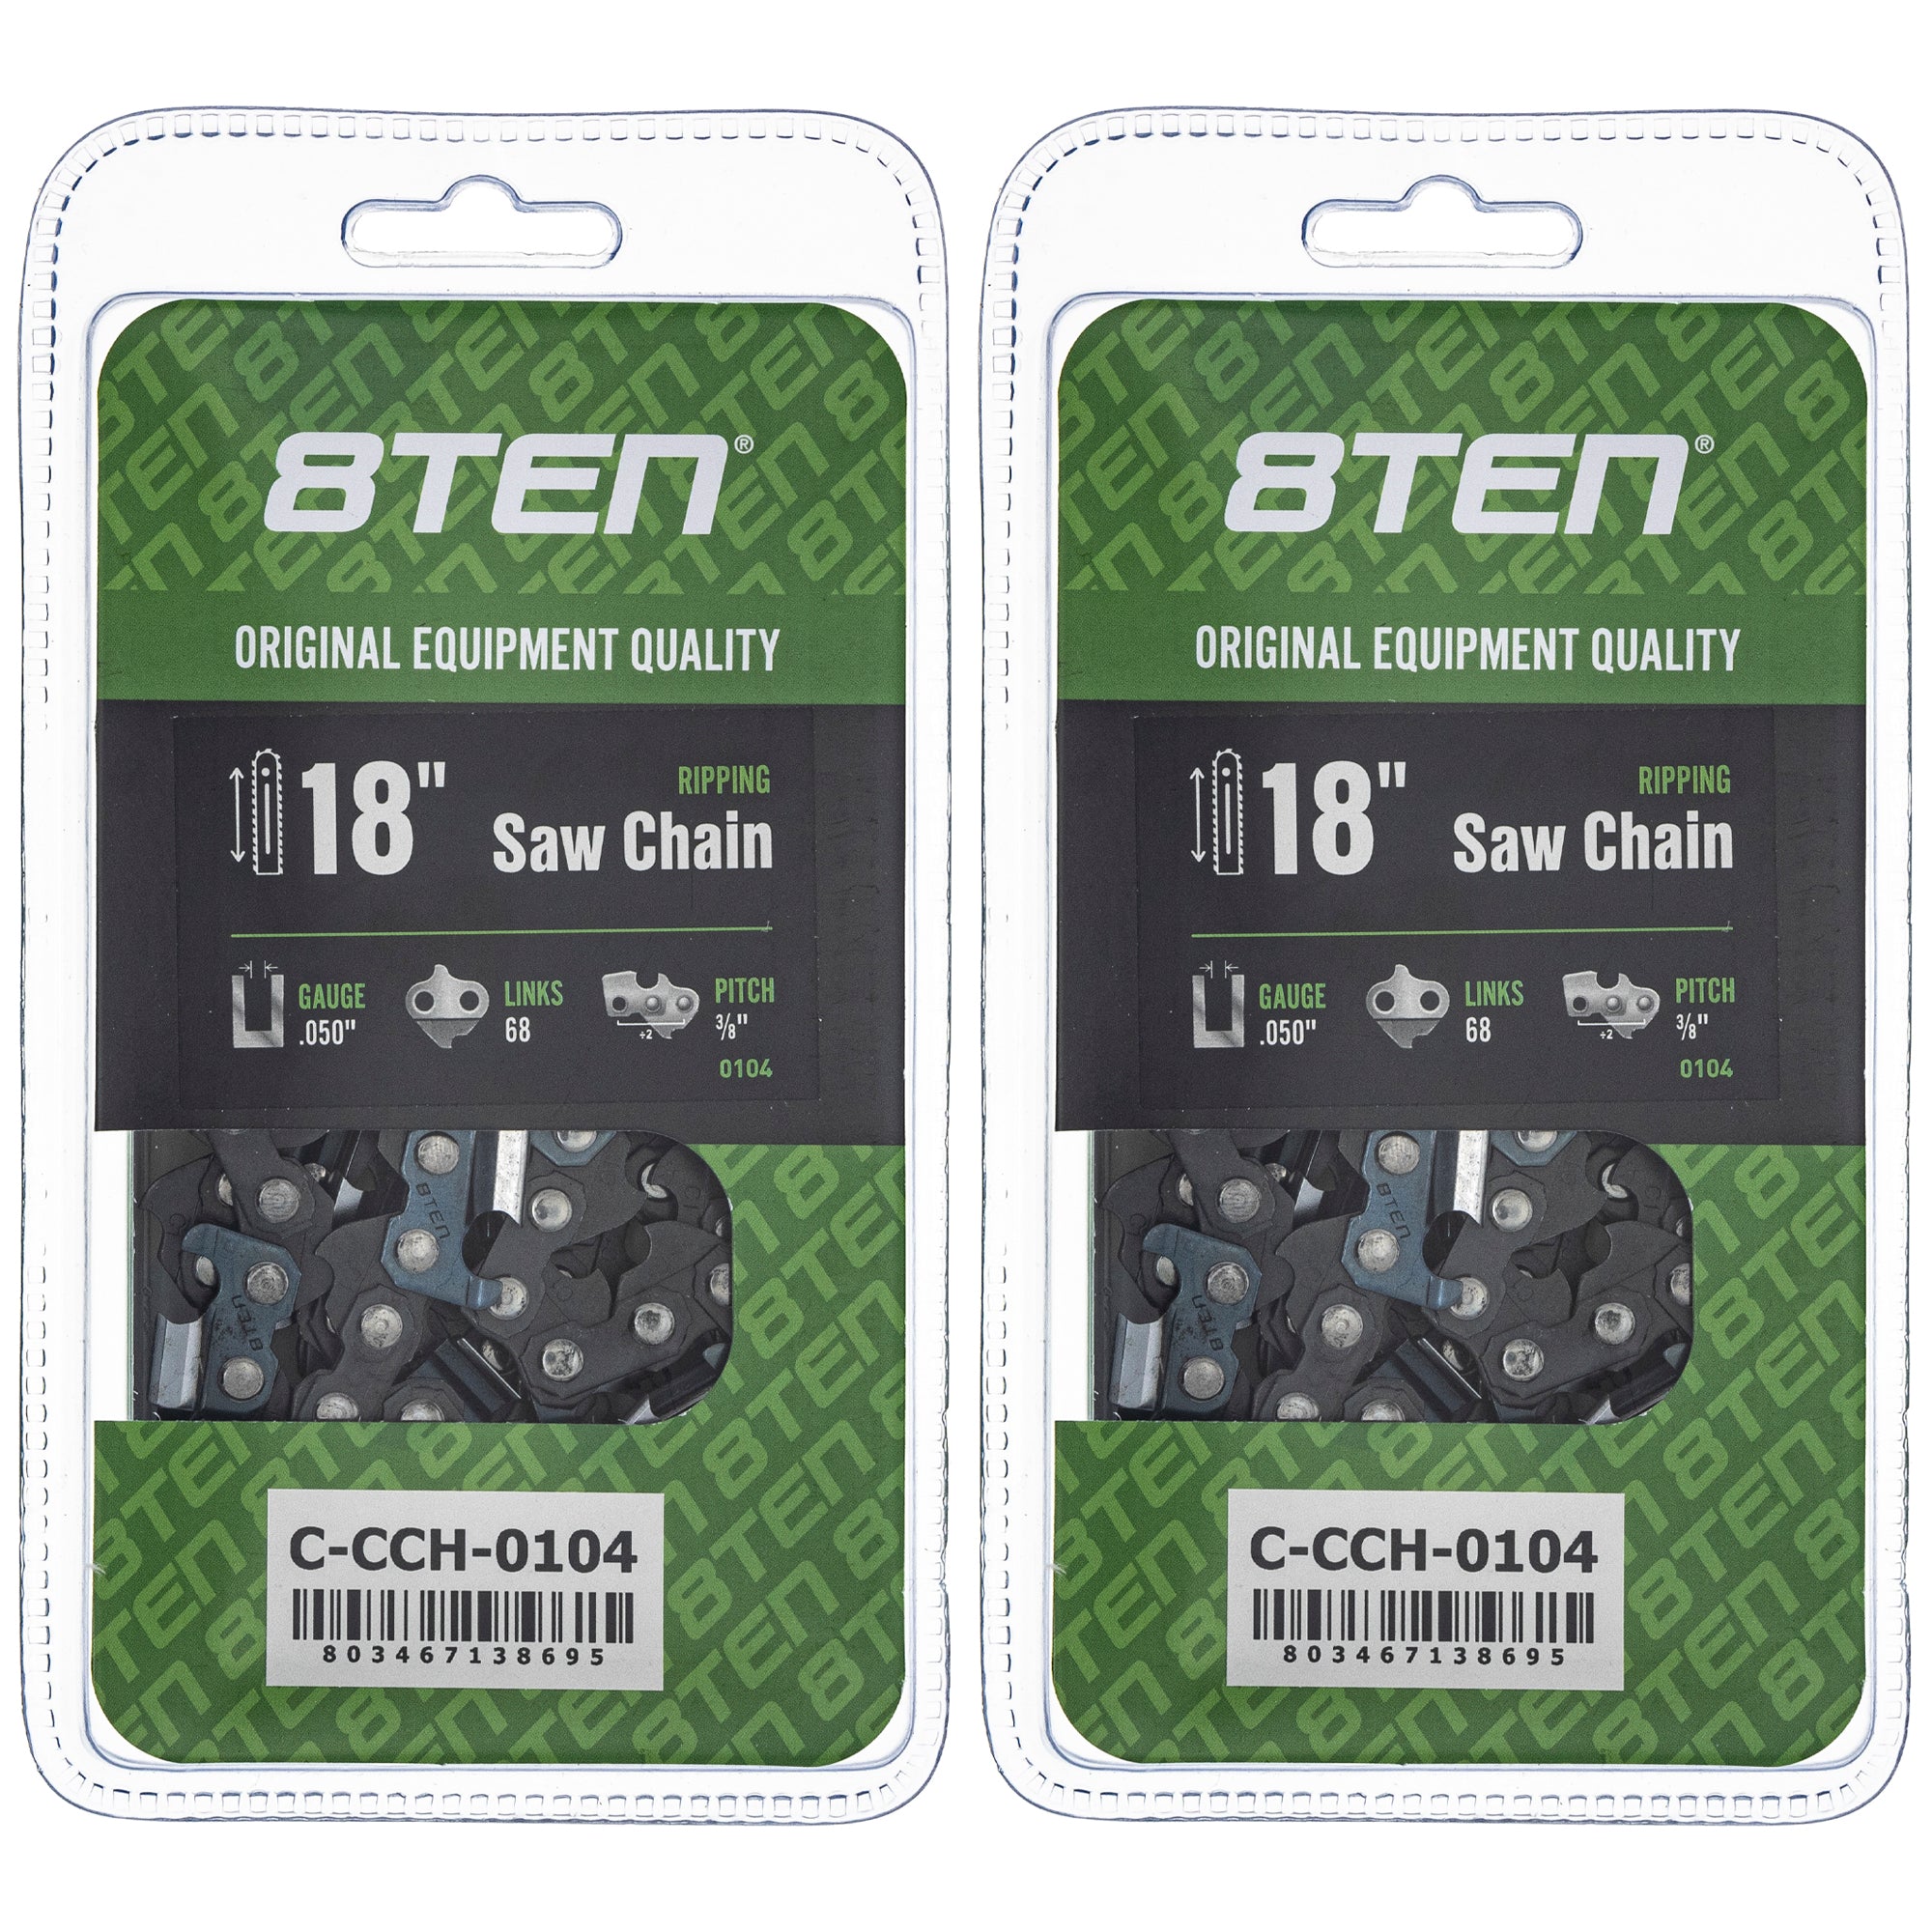 Chainsaw Chain 18 Inch .050 3/8 68DL 2-Pack for zOTHER Stens Ref No Oregon Husqvarna 8TEN 810-CCC2326H